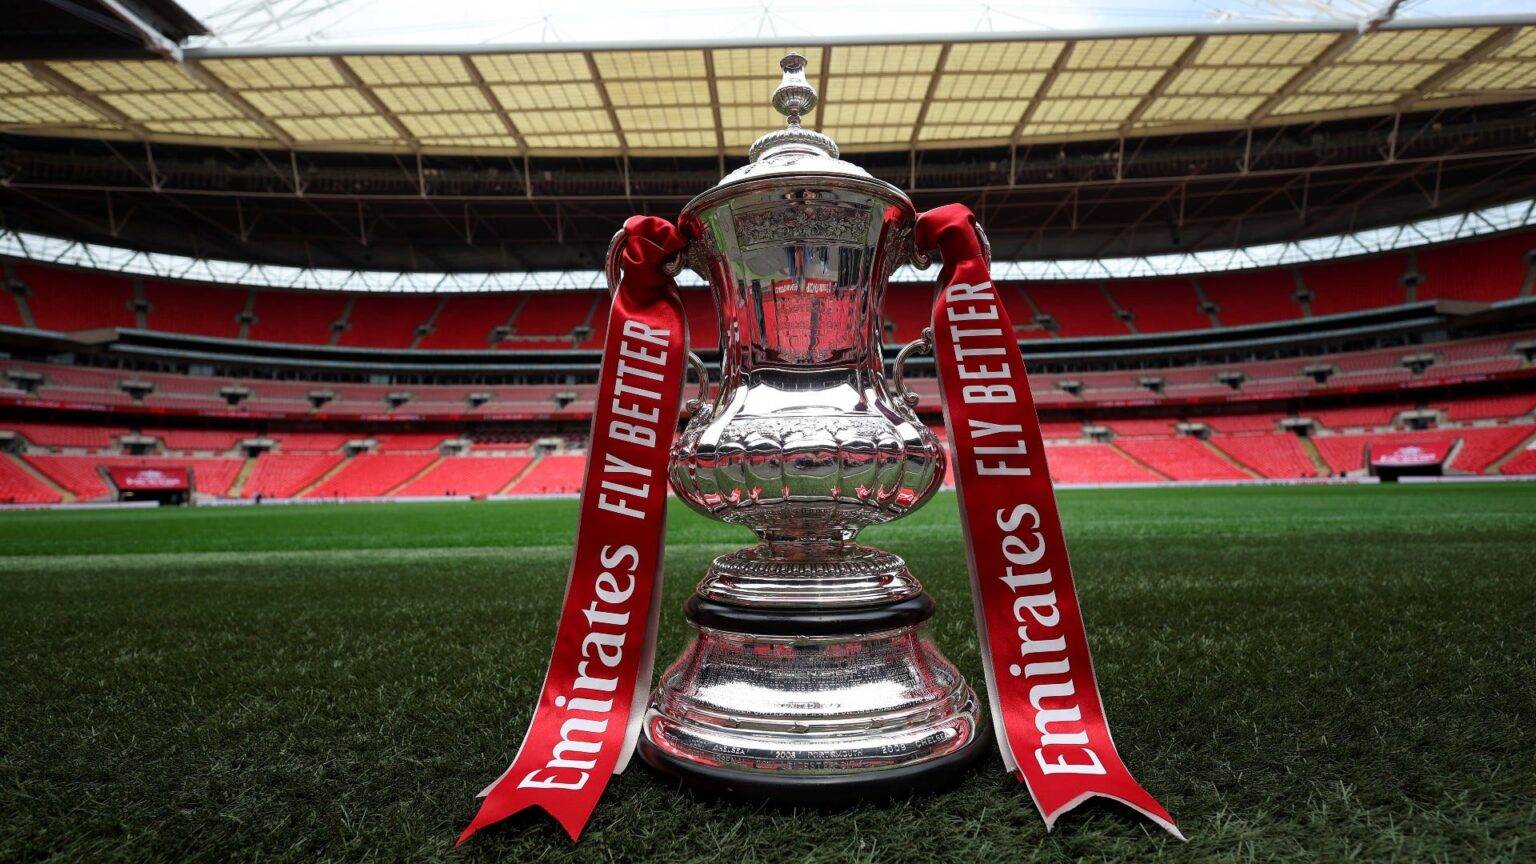 FA Cup fixtures this weekend- 16/03 - Liverpool take on Man Utd